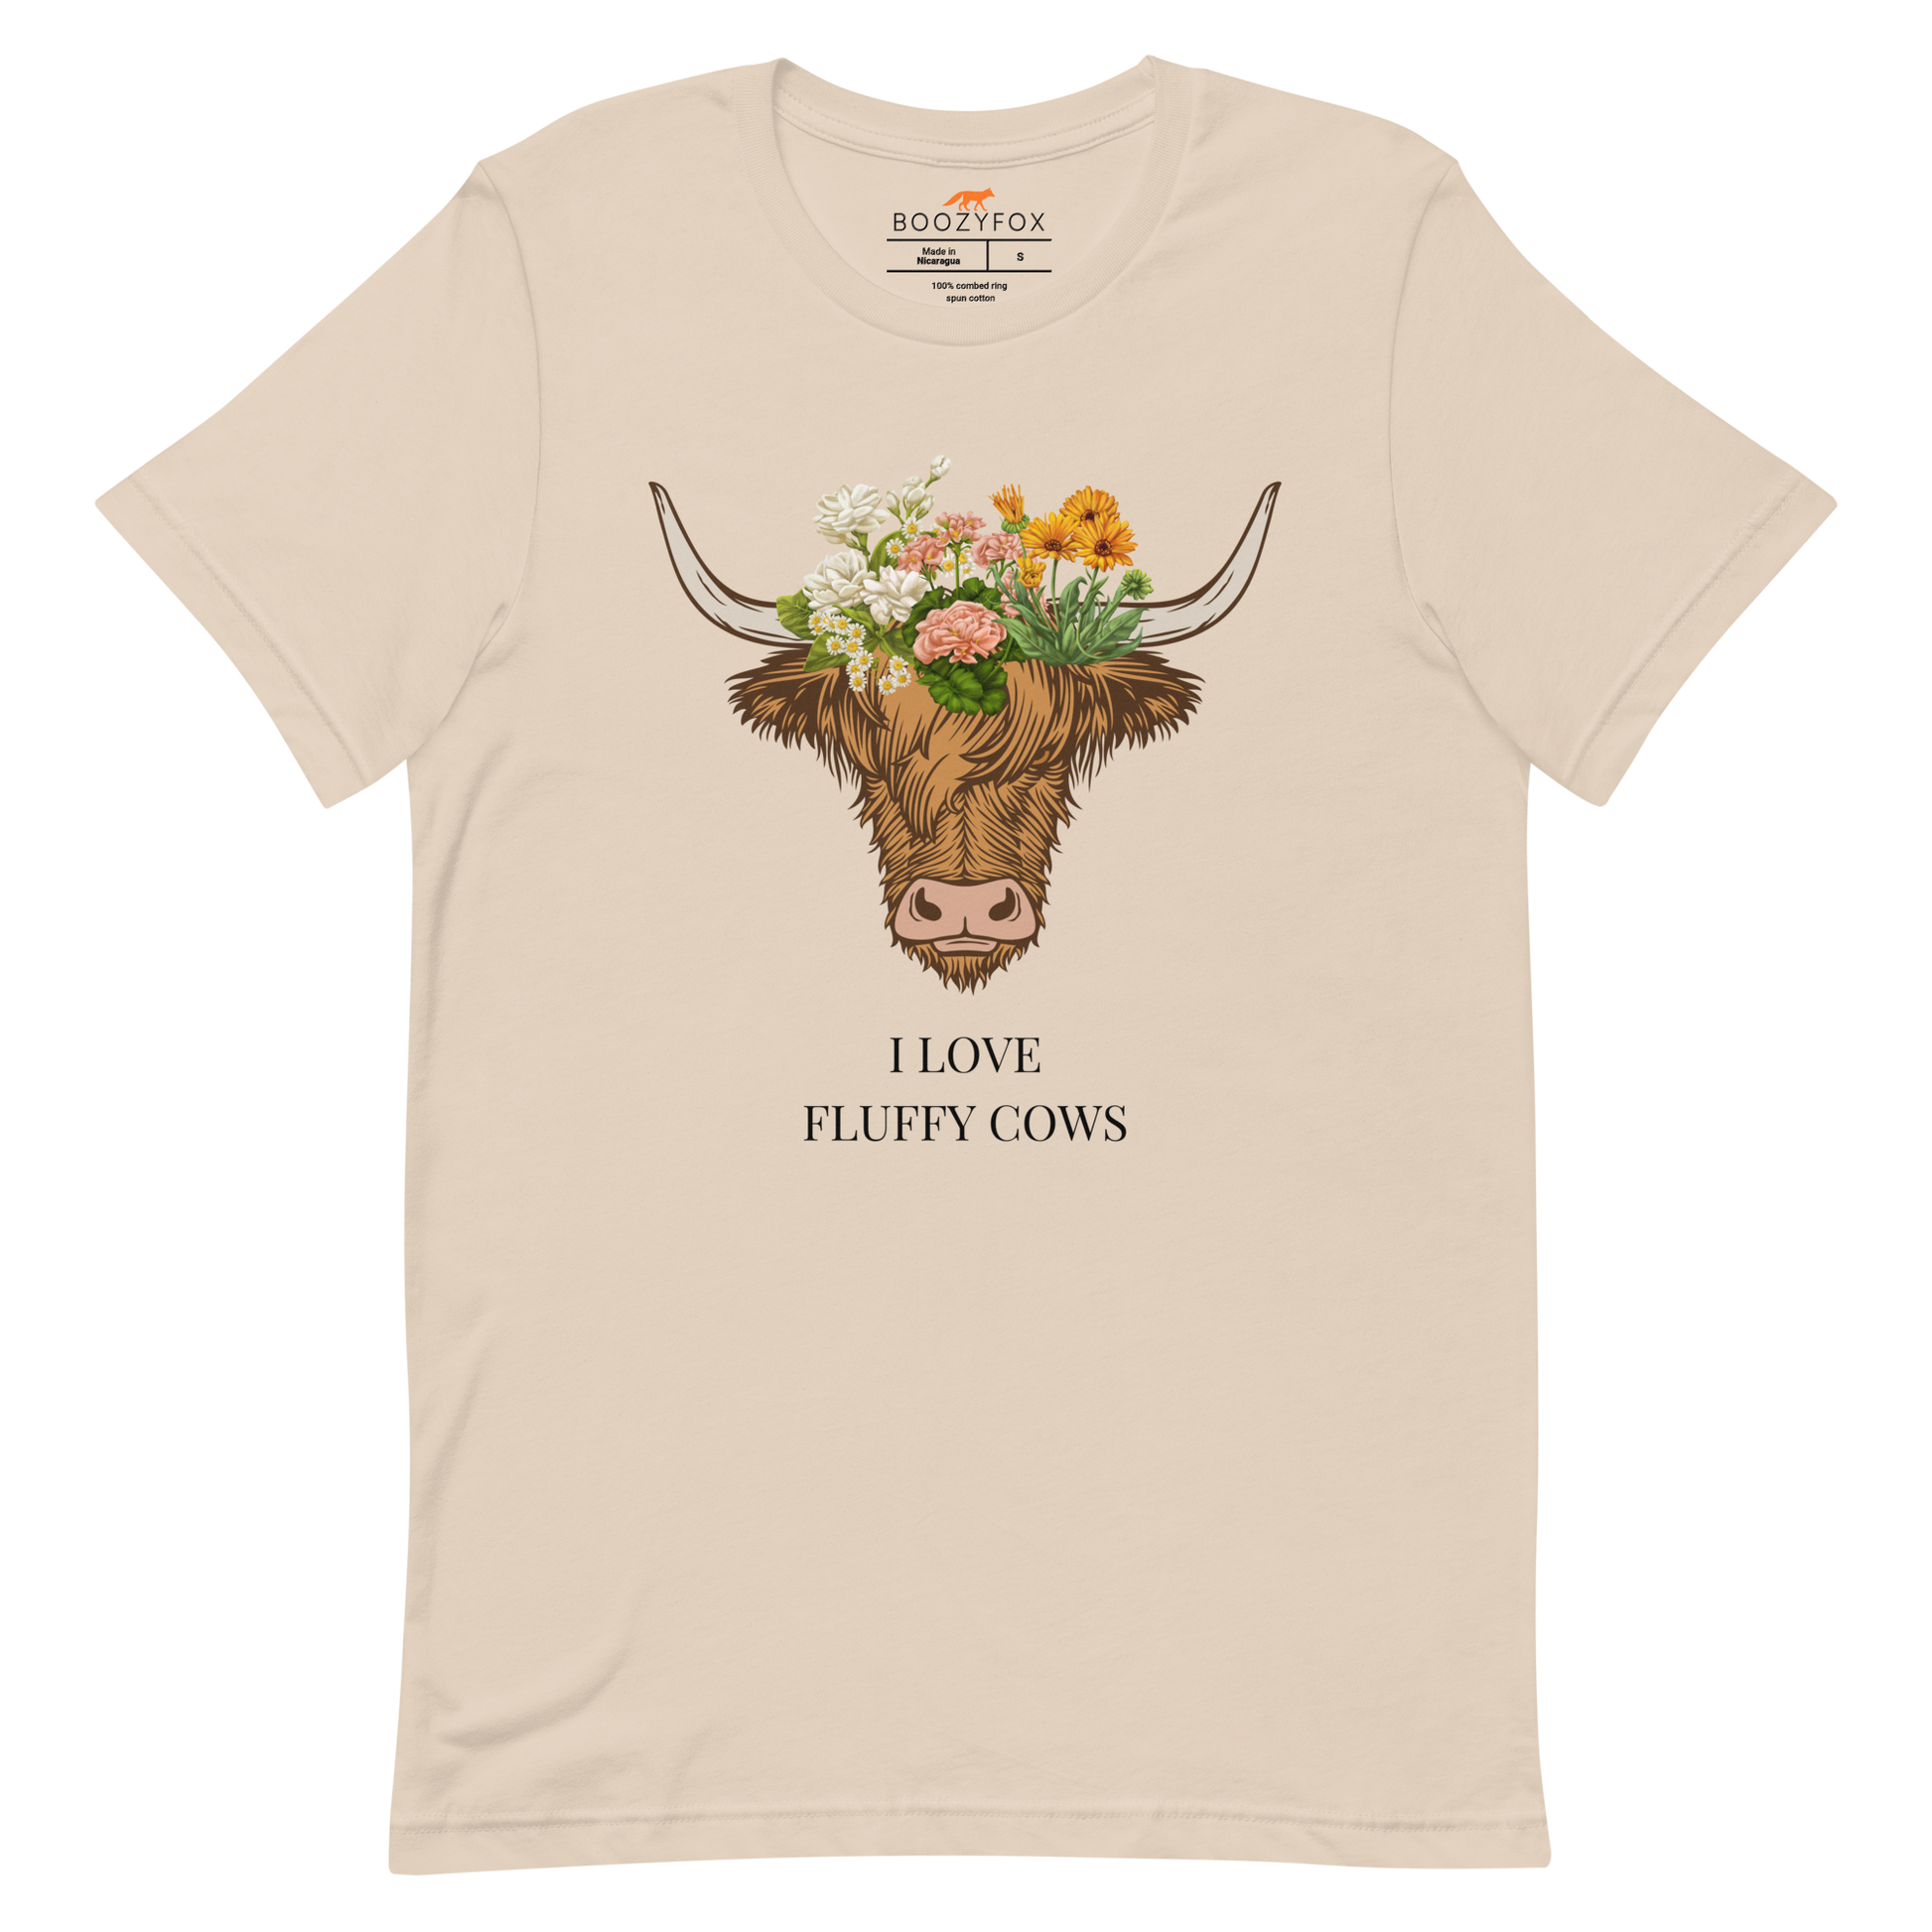 Soft Cream Premium Highland Cow Tee featuring an adorable I Love Fluffy Cows graphic on the chest - Cute Graphic Highland Cow Tees - Boozy Fox